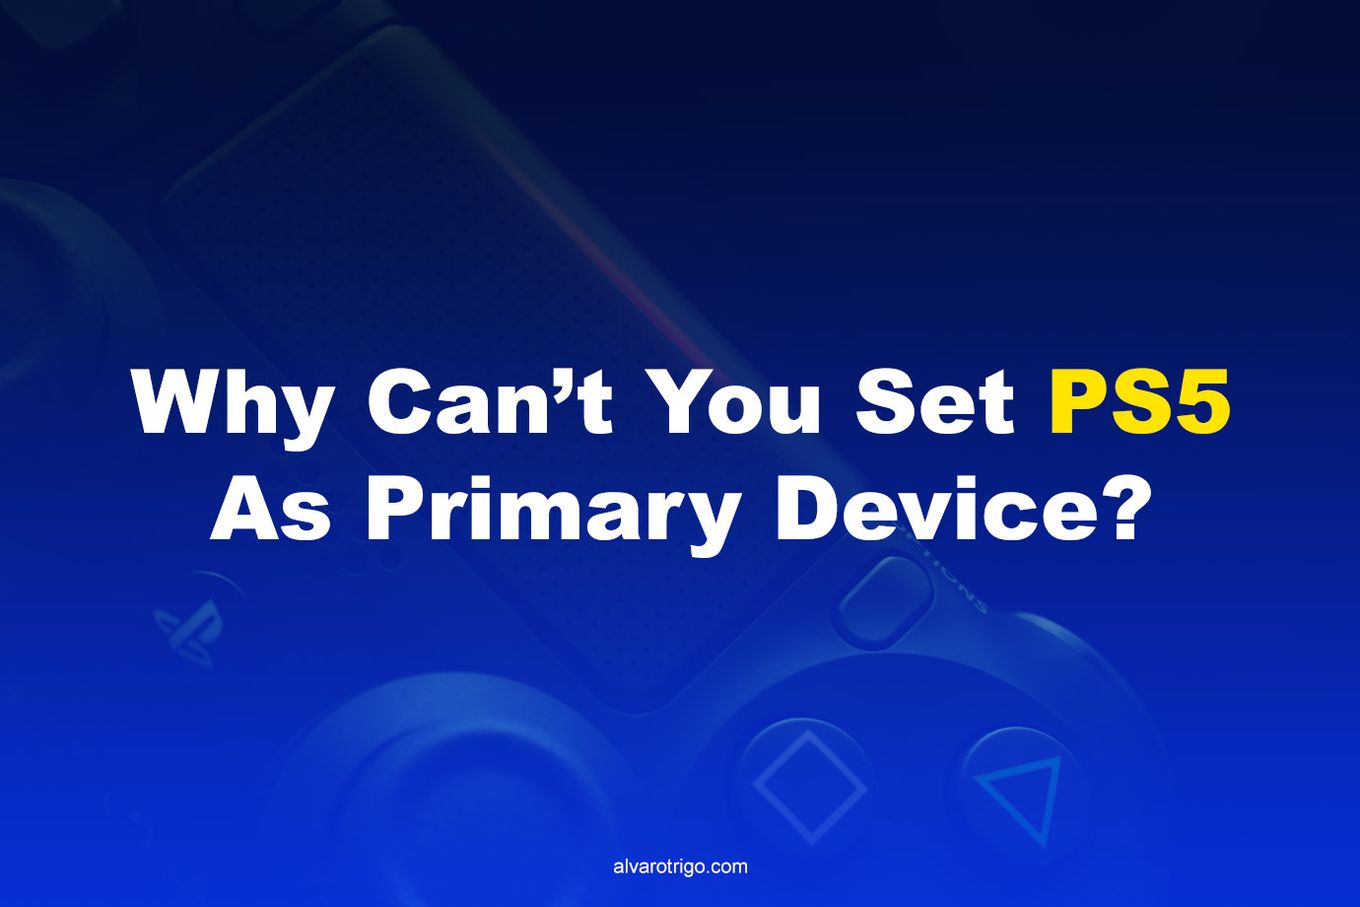 Why Can’t you Set PS5 as Primary Device?